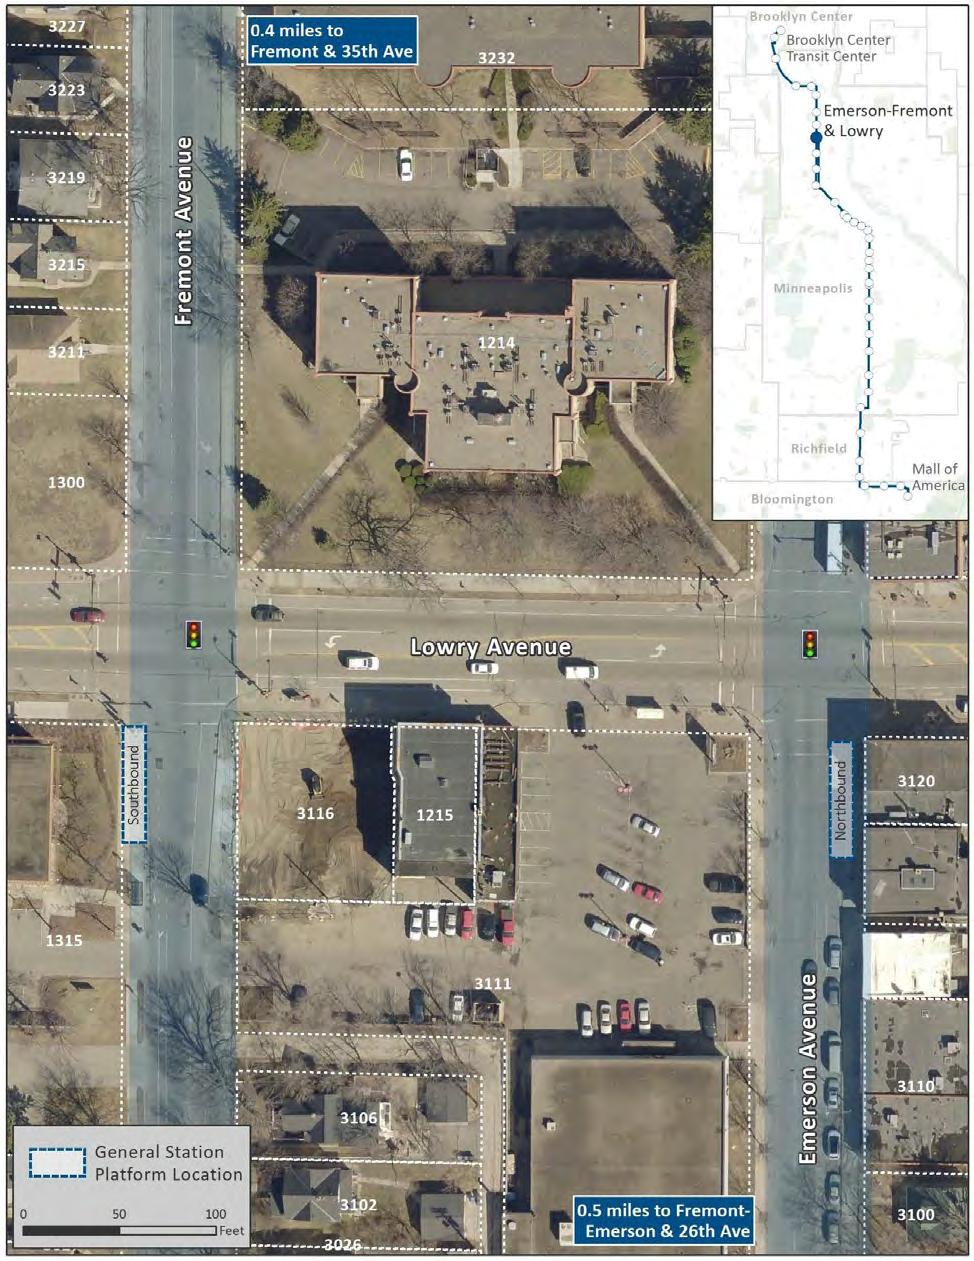 Figure 26: Recommended station location - Emerson-Fremont &